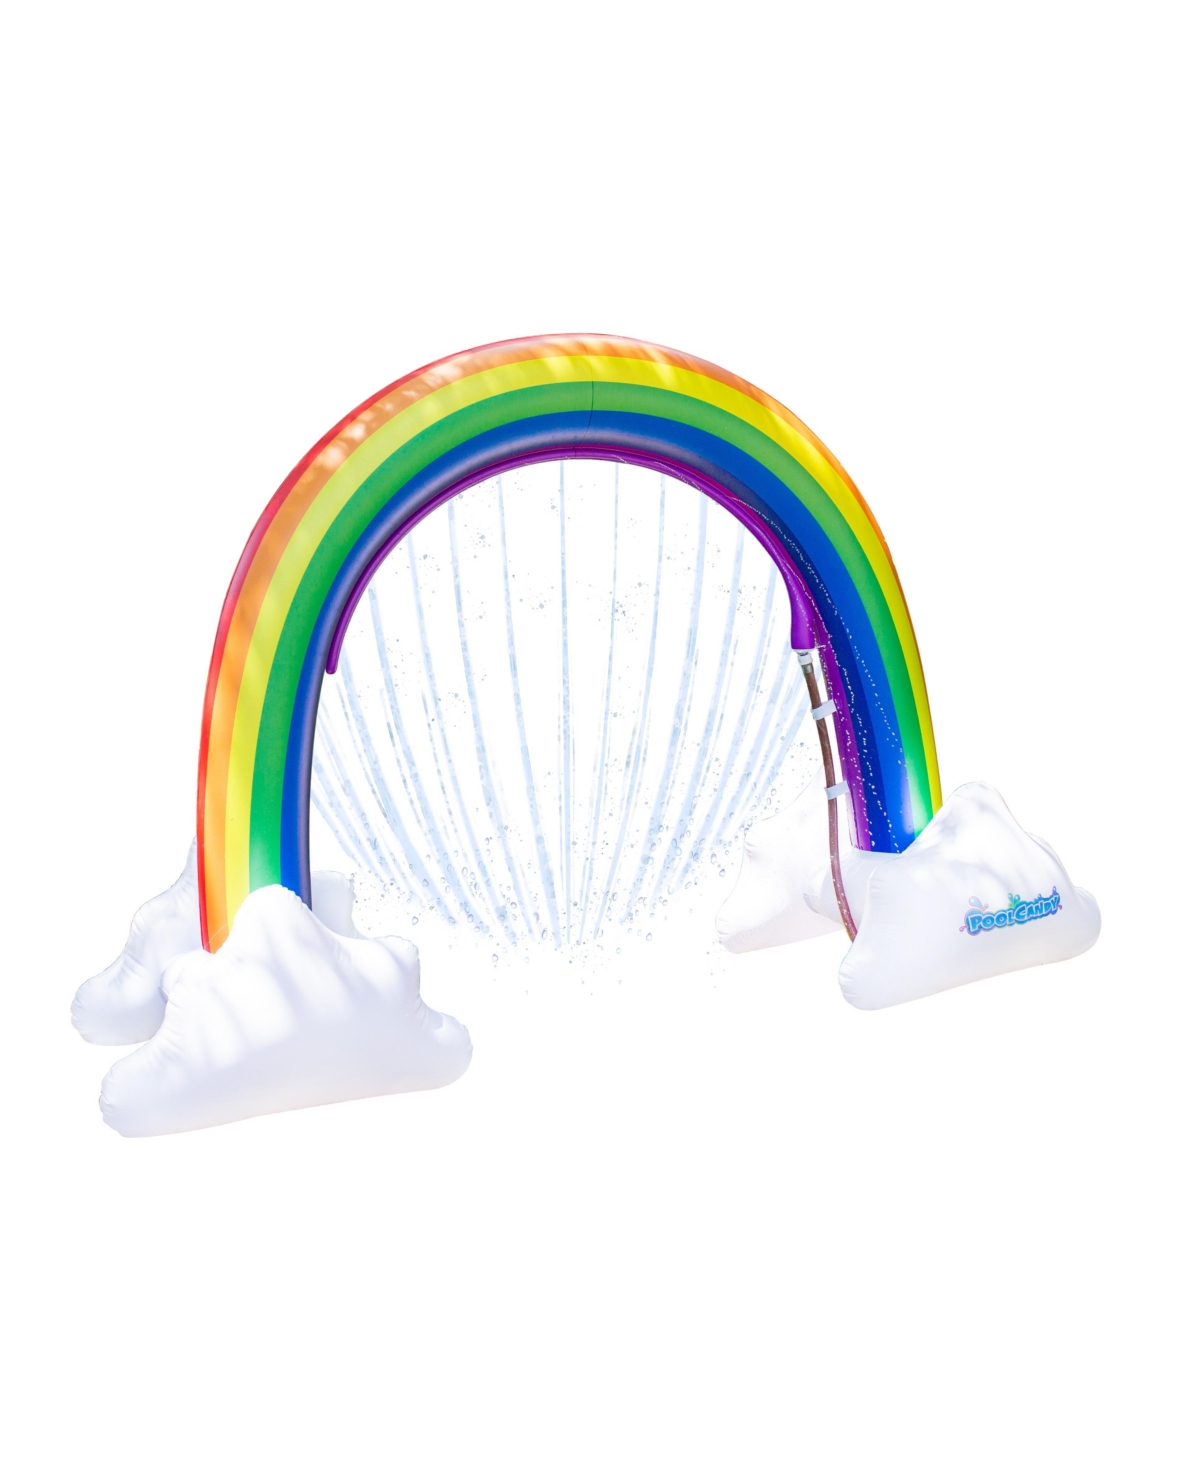 Closeout! PoolCandy Giant Rainbow Sprinkler - Red, Blue, Yellow